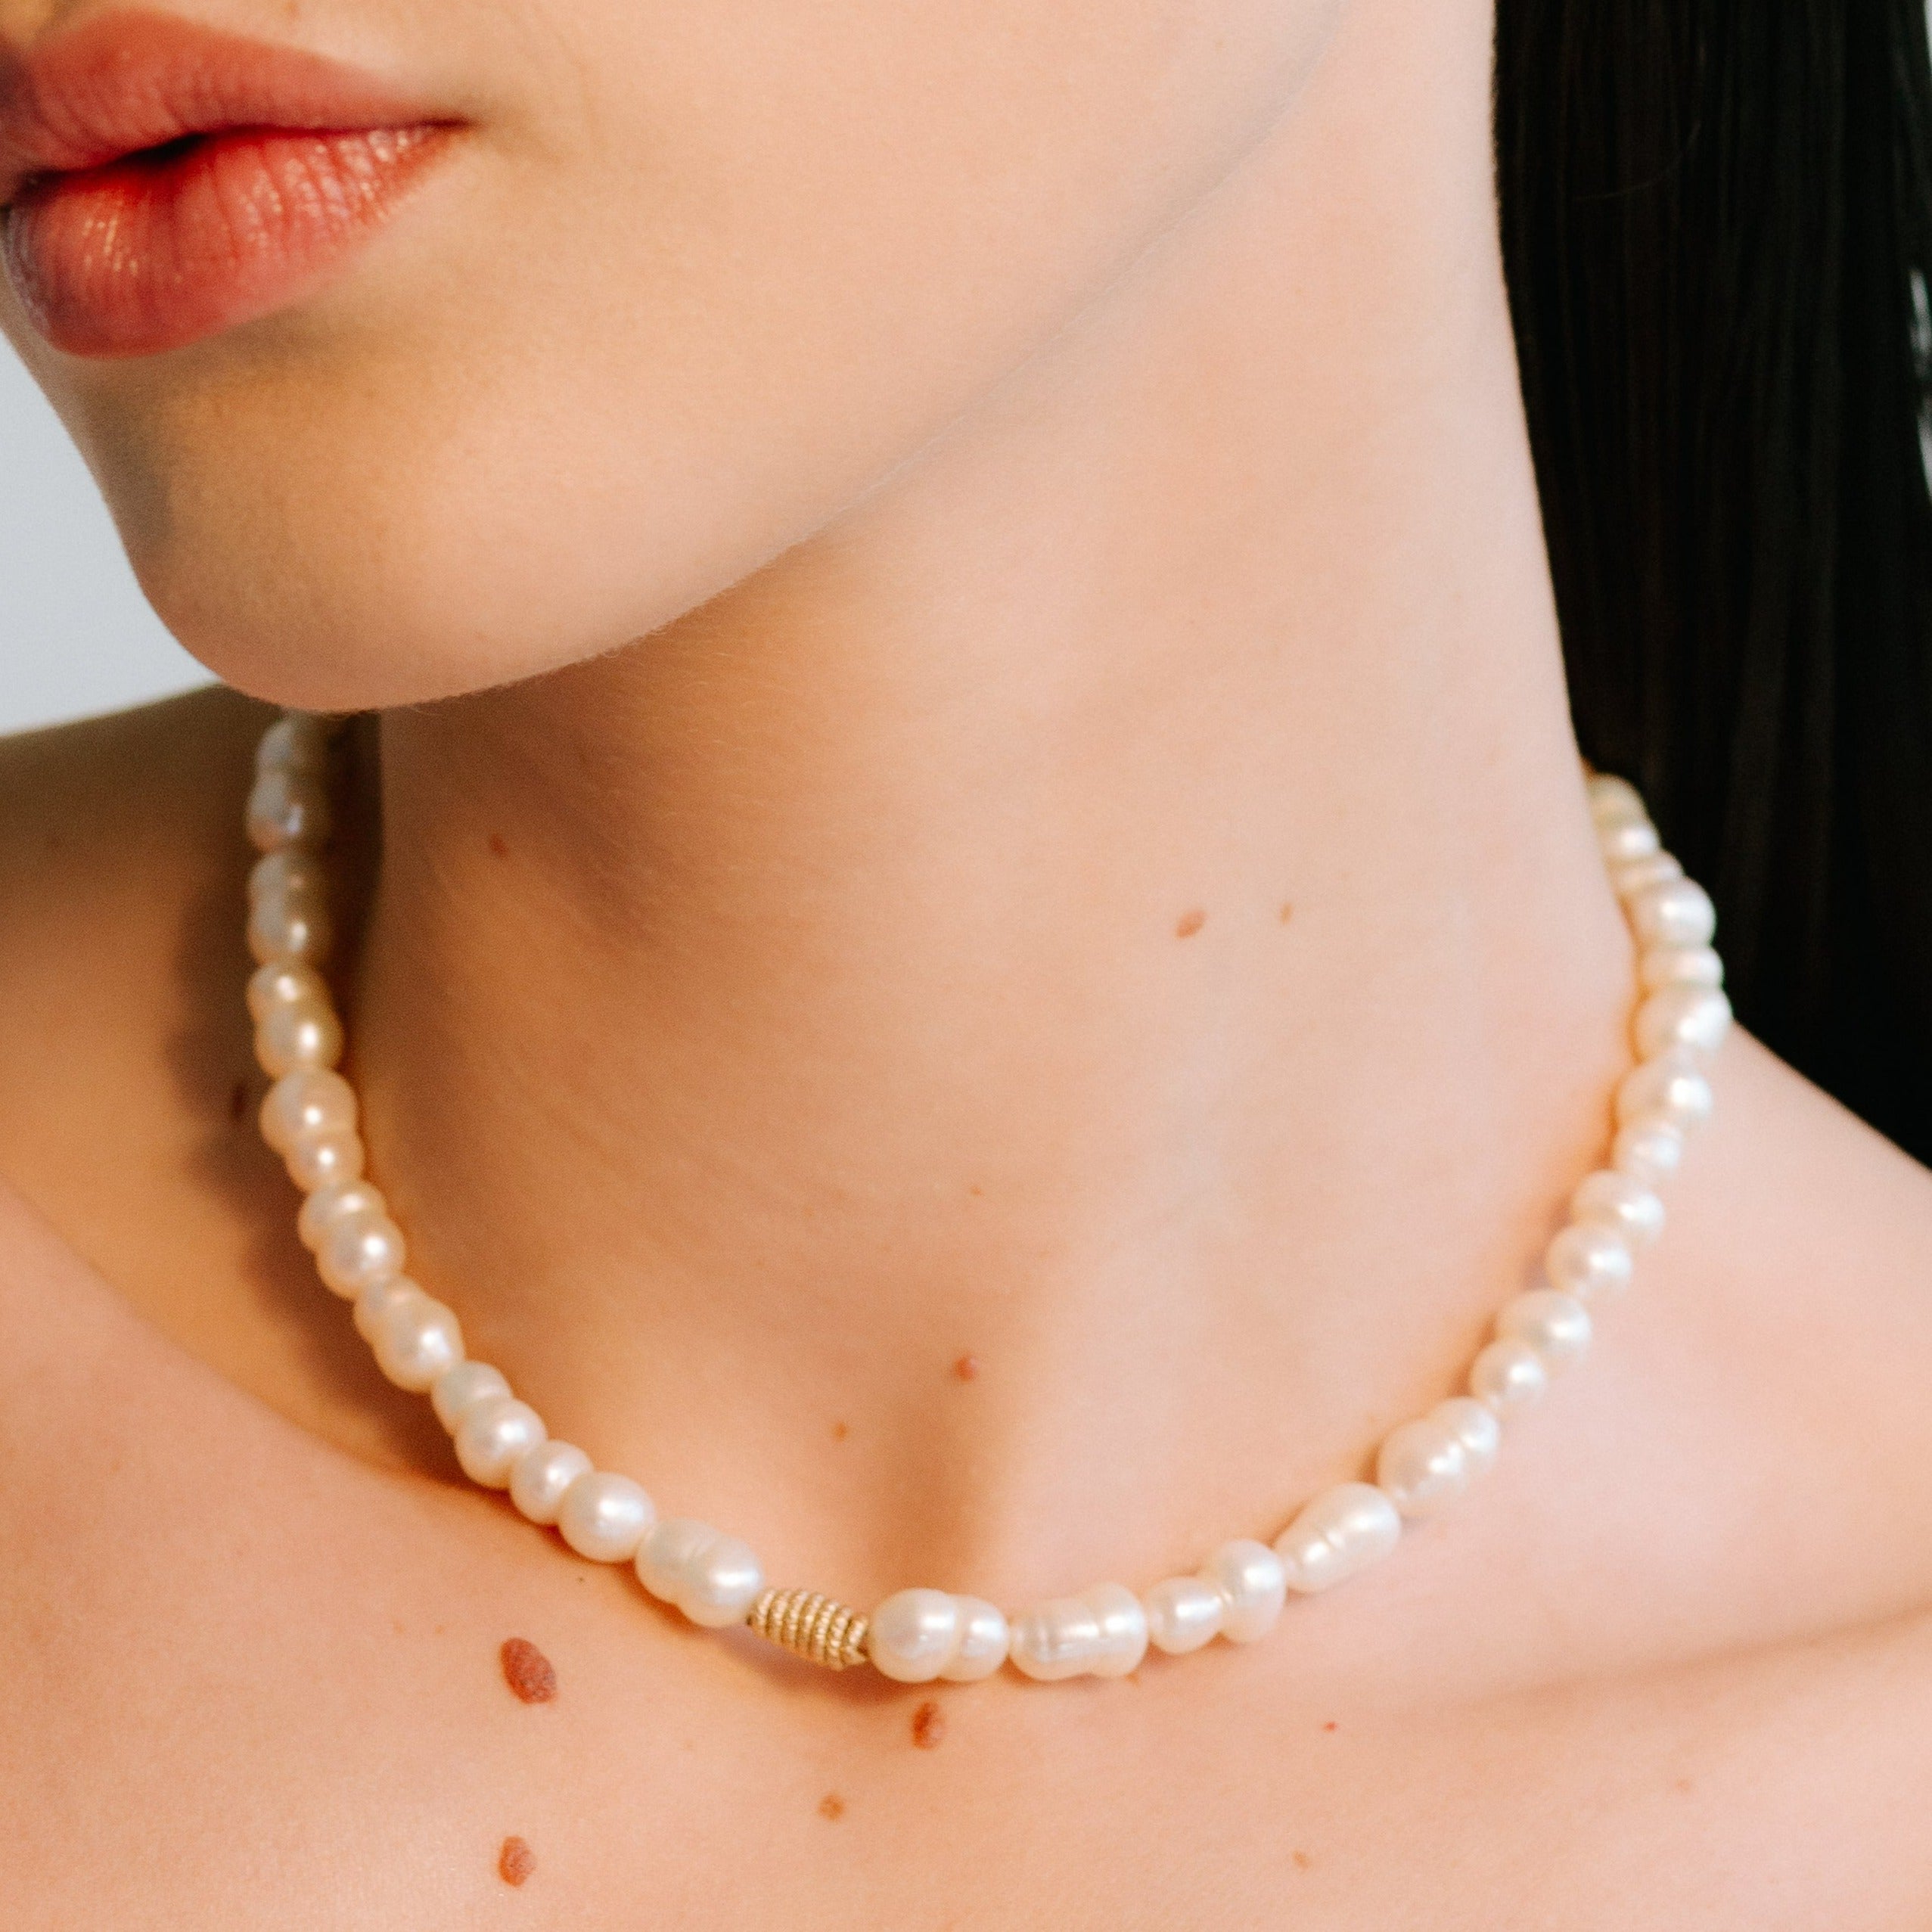 Diana Necklace #2 - Pearls